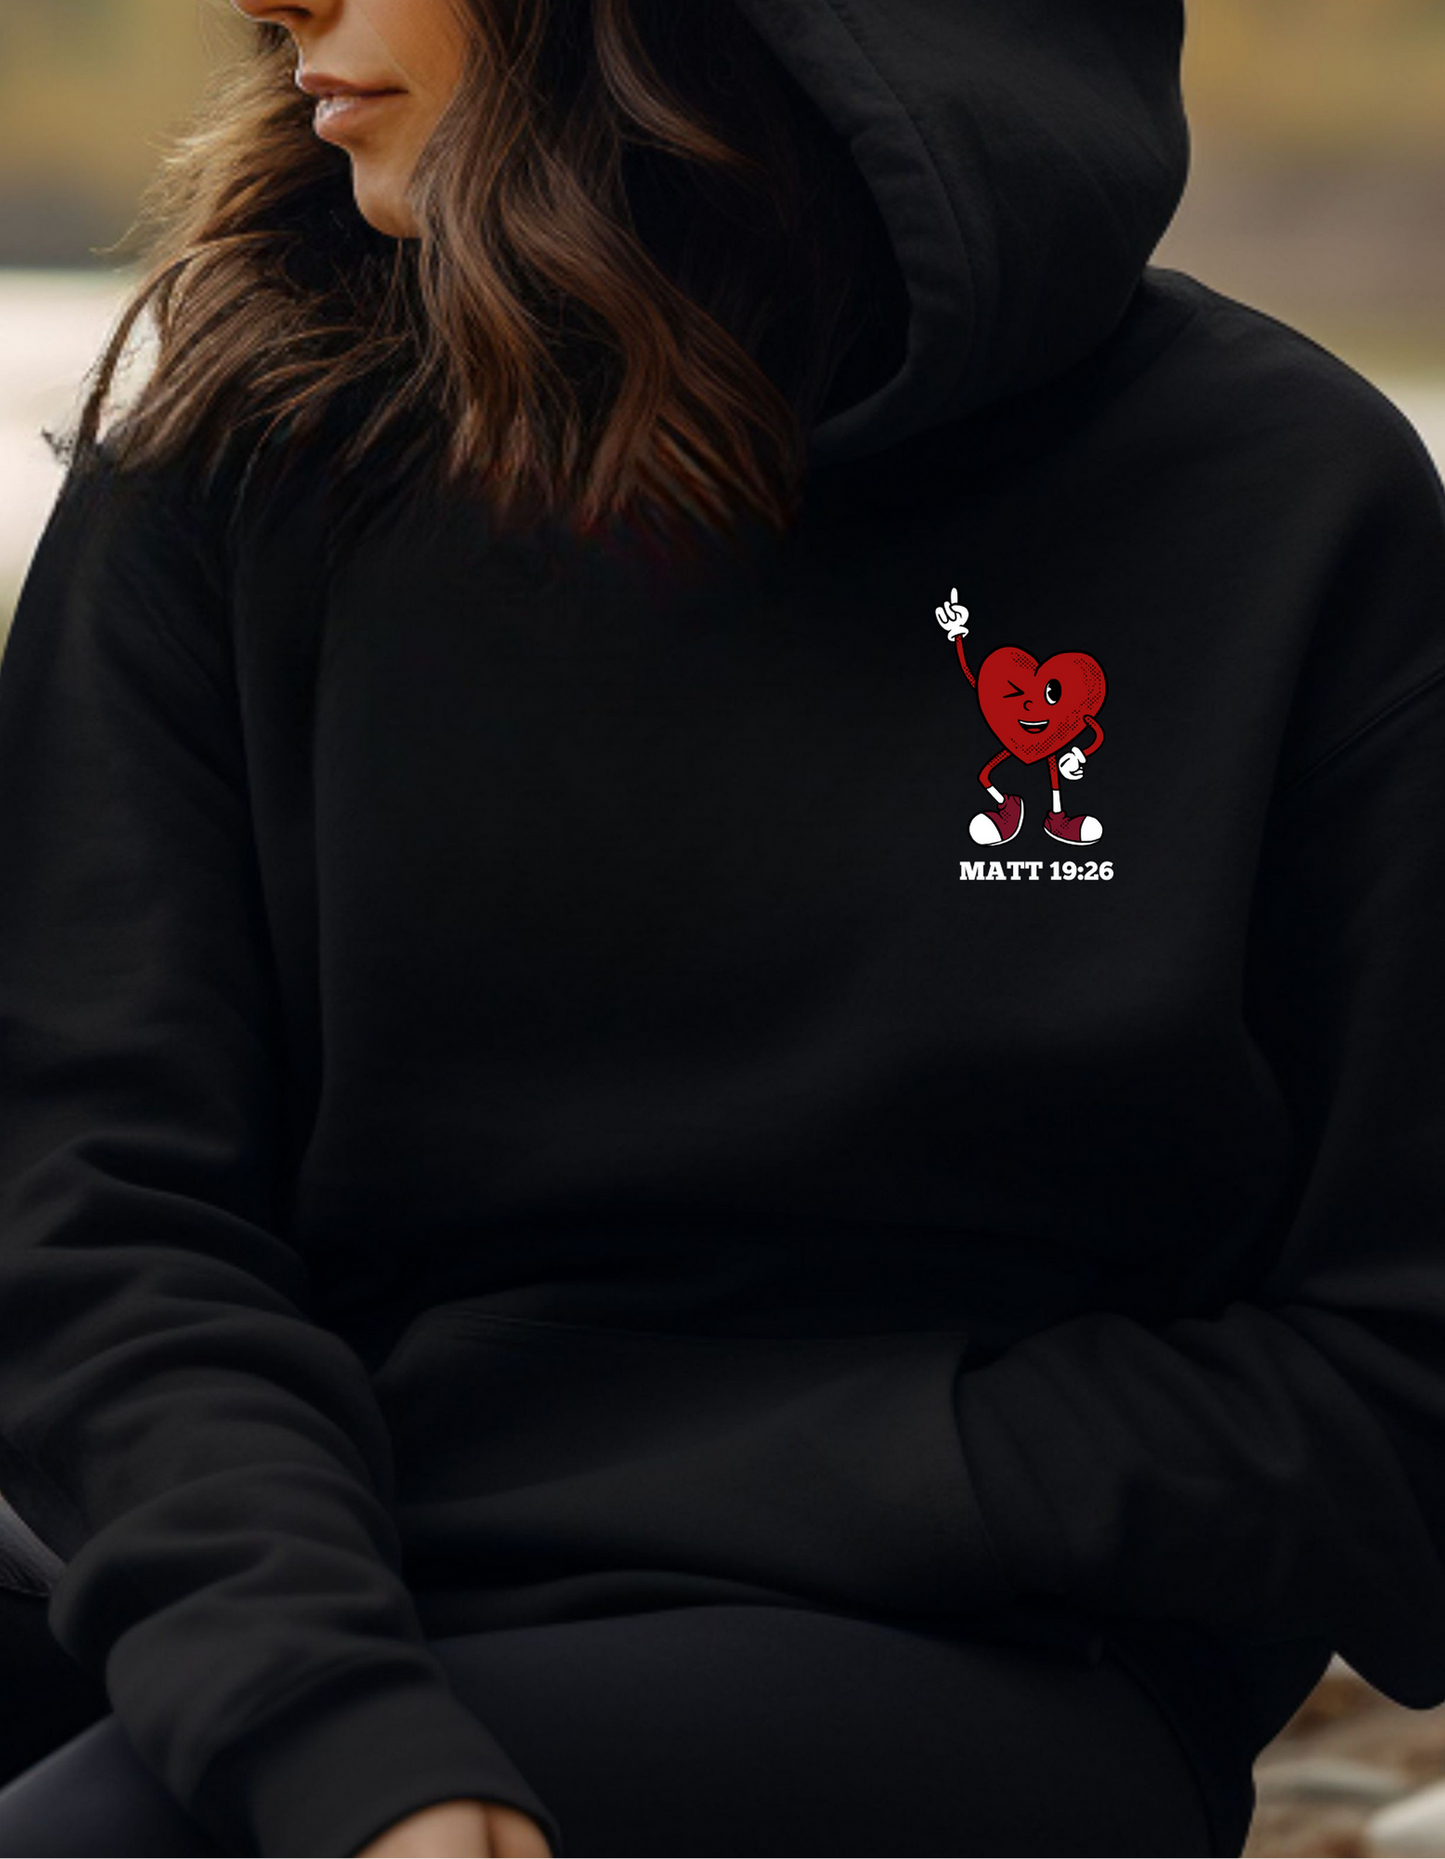 ALL THINGS ARE POSSIBLE HEART UNISEX HOODIE